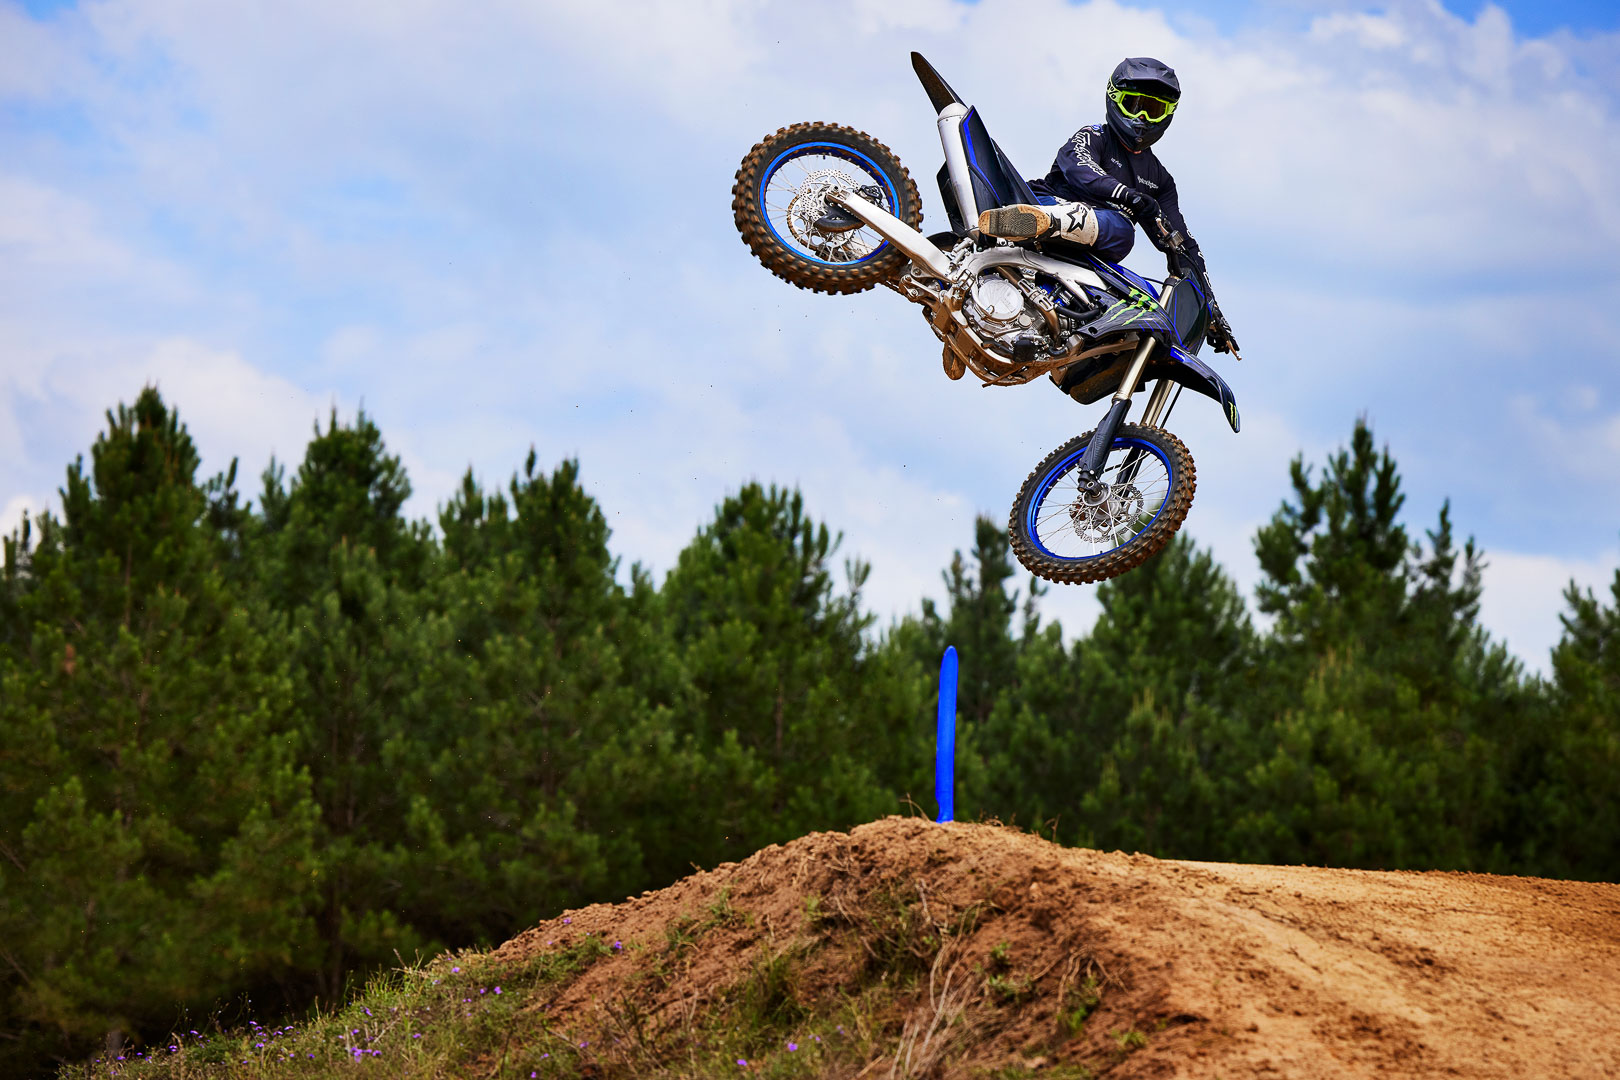 2022 Yamaha YZ450F First Look 5 Fast Facts 30 Photos 1620x1080